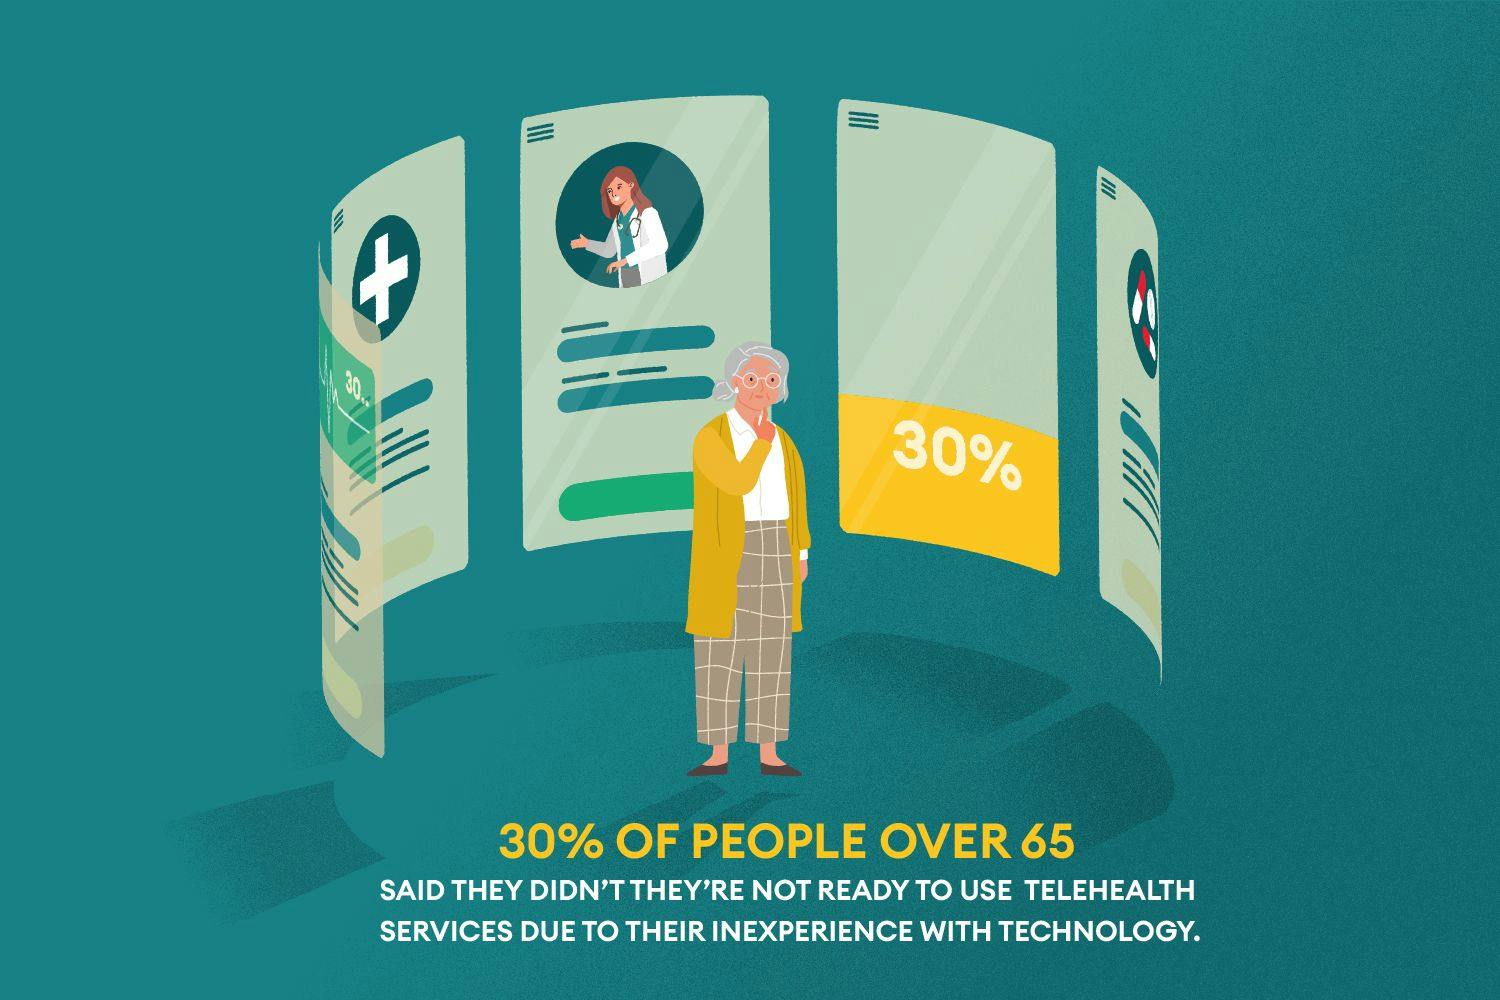 Illustration of older person surrounded by screens. Text reads: 30% OF PEOPLE OVER 65 SAID THEY DIDN'T THEY'RE NOT READY TO USE TELEHEALTH SERVICES DUE TO THEIR INEXPERIENCE WITH TECHNOLOGY.